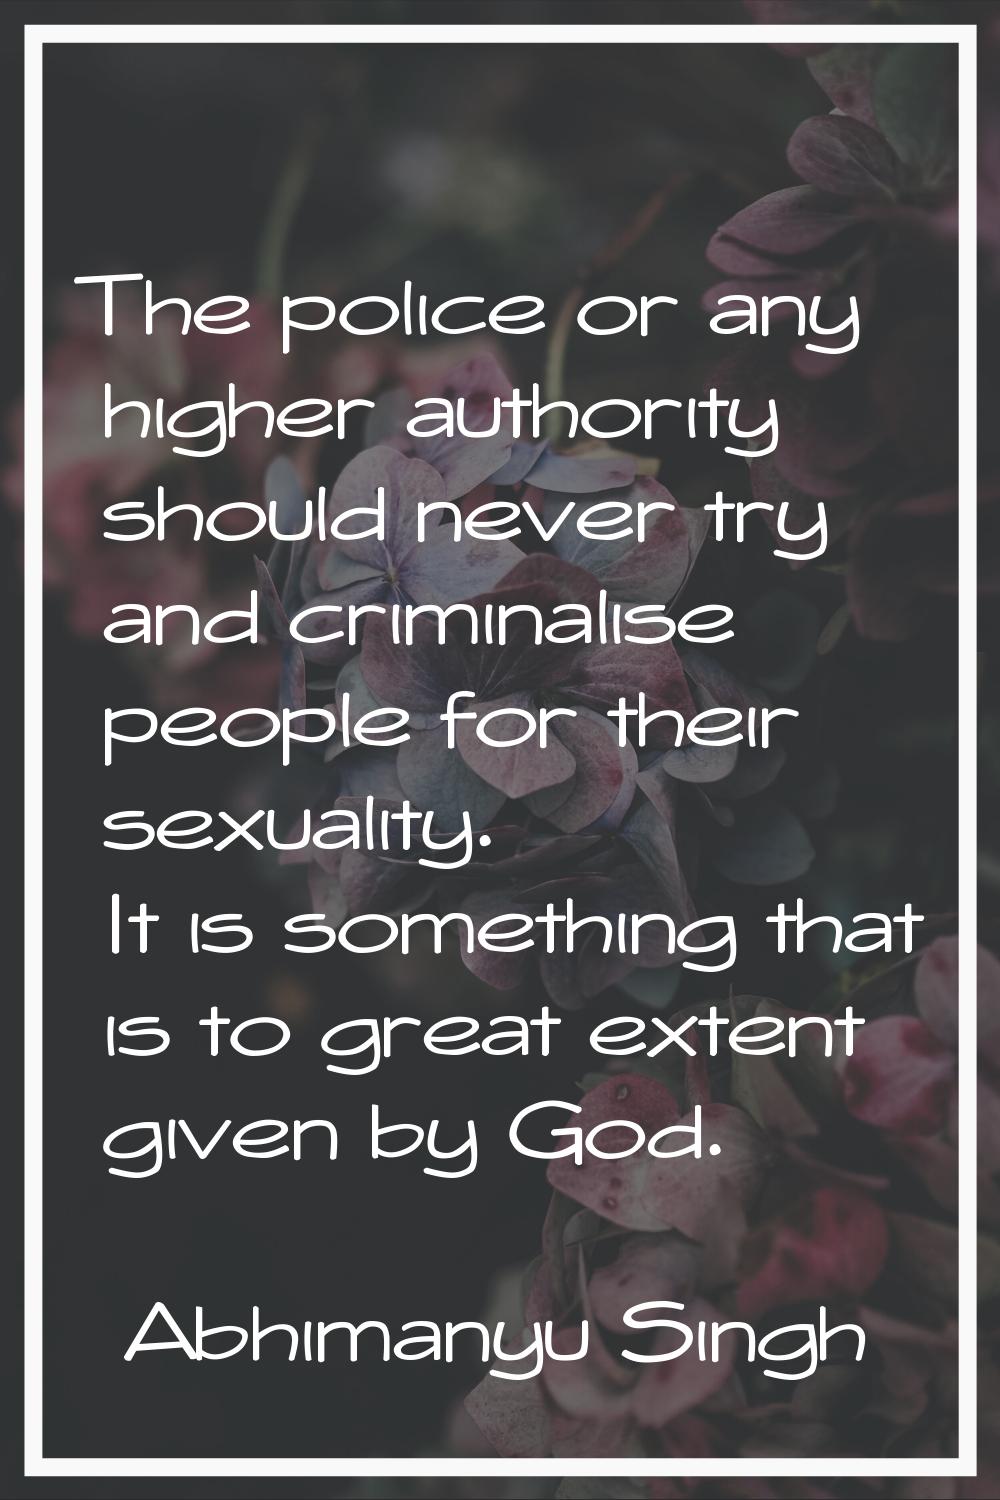 The police or any higher authority should never try and criminalise people for their sexuality. It 